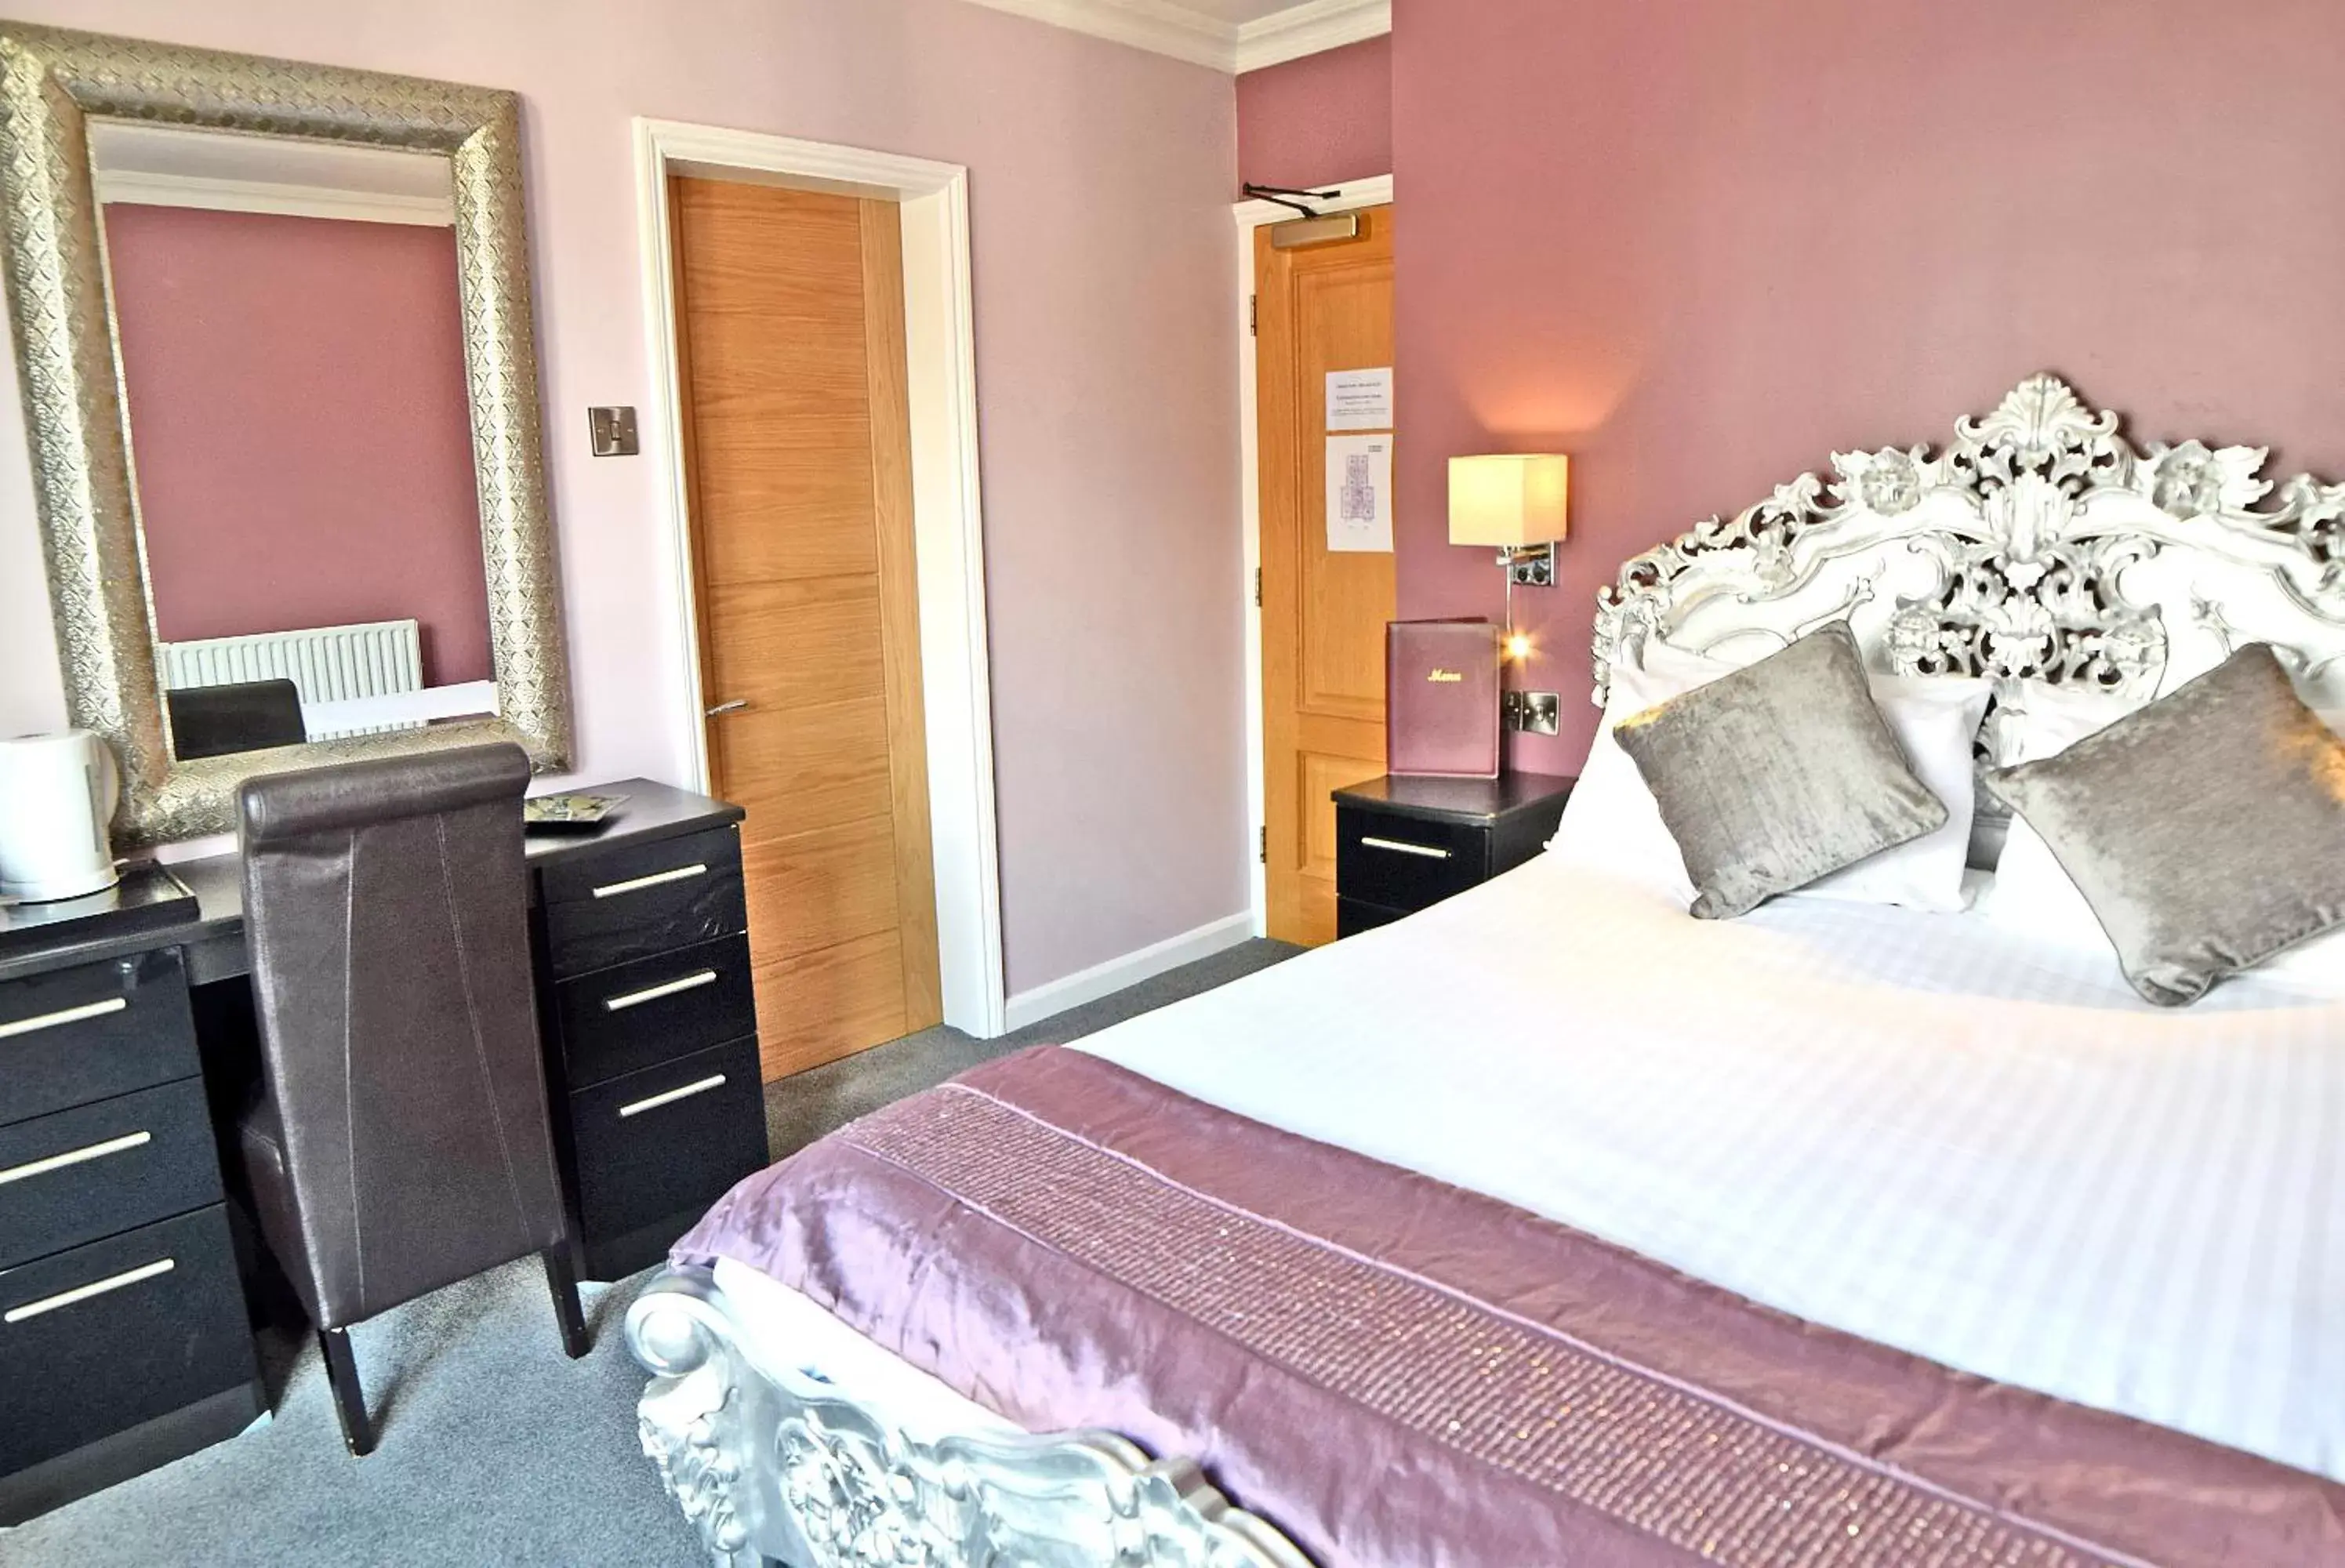 Bedroom, Room Photo in Dovedale Hotel and Restaurant